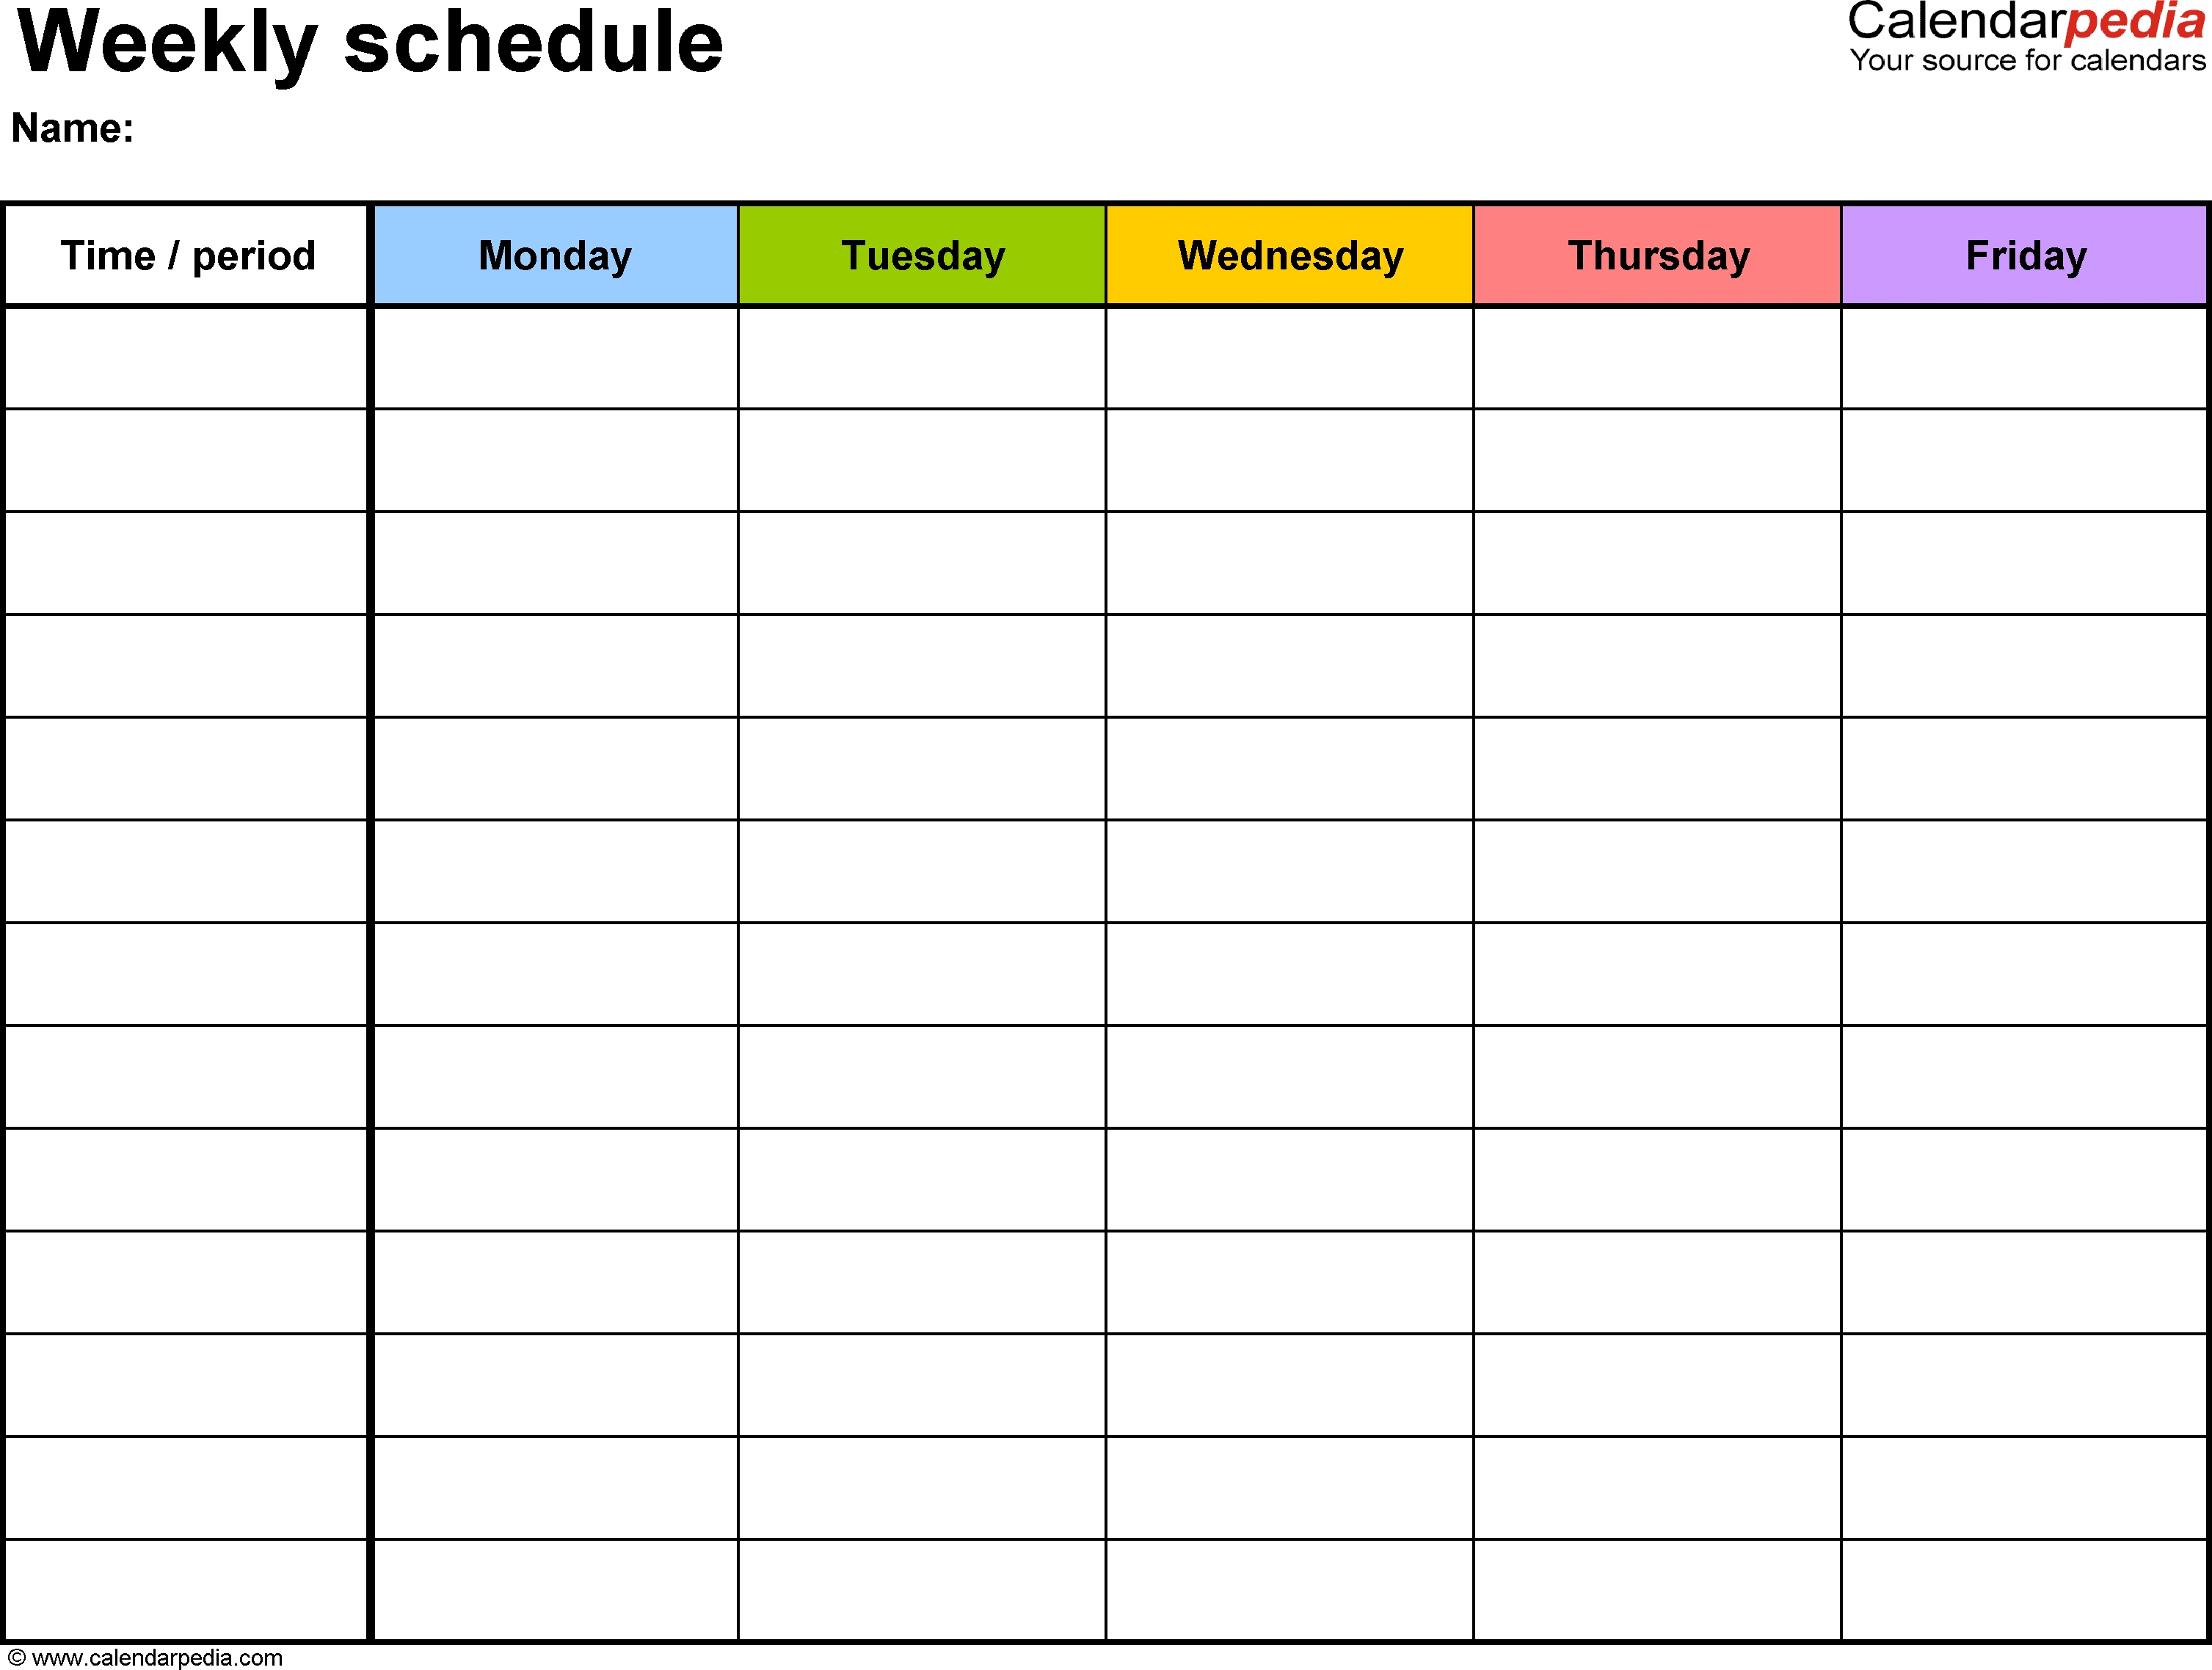 Free Weekly Schedule Templates For Pdf - 18 Templates inside Printable Weekly Calendar With 15 Minute Time Slots